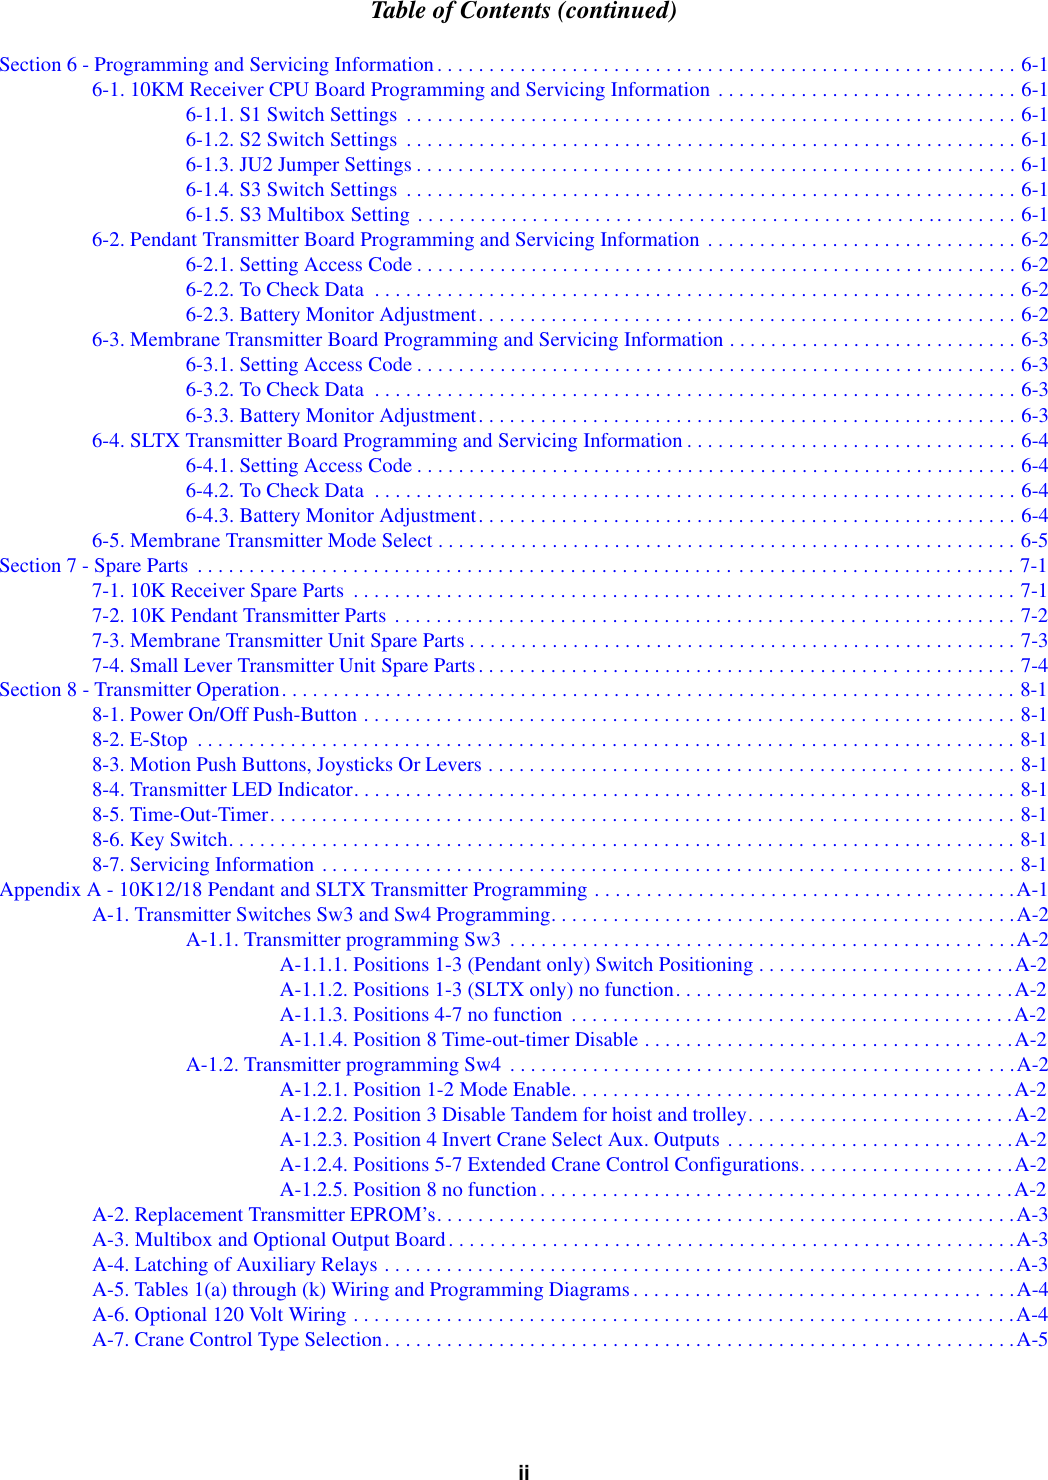 Table of Contents (continued)iiSection 6 - Programming and Servicing Information. . . . . . . . . . . . . . . . . . . . . . . . . . . . . . . . . . . . . . . . . . . . . . . . . . . . . . . . 6-16-1. 10KM Receiver CPU Board Programming and Servicing Information . . . . . . . . . . . . . . . . . . . . . . . . . . . . . 6-16-1.1. S1 Switch Settings  . . . . . . . . . . . . . . . . . . . . . . . . . . . . . . . . . . . . . . . . . . . . . . . . . . . . . . . . . . . 6-16-1.2. S2 Switch Settings  . . . . . . . . . . . . . . . . . . . . . . . . . . . . . . . . . . . . . . . . . . . . . . . . . . . . . . . . . . . 6-16-1.3. JU2 Jumper Settings . . . . . . . . . . . . . . . . . . . . . . . . . . . . . . . . . . . . . . . . . . . . . . . . . . . . . . . . . . 6-16-1.4. S3 Switch Settings  . . . . . . . . . . . . . . . . . . . . . . . . . . . . . . . . . . . . . . . . . . . . . . . . . . . . . . . . . . . 6-16-1.5. S3 Multibox Setting . . . . . . . . . . . . . . . . . . . . . . . . . . . . . . . . . . . . . . . . . . . . . . . . . . . . . . . . . . 6-16-2. Pendant Transmitter Board Programming and Servicing Information . . . . . . . . . . . . . . . . . . . . . . . . . . . . . . 6-26-2.1. Setting Access Code . . . . . . . . . . . . . . . . . . . . . . . . . . . . . . . . . . . . . . . . . . . . . . . . . . . . . . . . . . 6-26-2.2. To Check Data  . . . . . . . . . . . . . . . . . . . . . . . . . . . . . . . . . . . . . . . . . . . . . . . . . . . . . . . . . . . . . . 6-26-2.3. Battery Monitor Adjustment. . . . . . . . . . . . . . . . . . . . . . . . . . . . . . . . . . . . . . . . . . . . . . . . . . . . 6-26-3. Membrane Transmitter Board Programming and Servicing Information . . . . . . . . . . . . . . . . . . . . . . . . . . . . 6-36-3.1. Setting Access Code . . . . . . . . . . . . . . . . . . . . . . . . . . . . . . . . . . . . . . . . . . . . . . . . . . . . . . . . . . 6-36-3.2. To Check Data  . . . . . . . . . . . . . . . . . . . . . . . . . . . . . . . . . . . . . . . . . . . . . . . . . . . . . . . . . . . . . . 6-36-3.3. Battery Monitor Adjustment. . . . . . . . . . . . . . . . . . . . . . . . . . . . . . . . . . . . . . . . . . . . . . . . . . . . 6-36-4. SLTX Transmitter Board Programming and Servicing Information . . . . . . . . . . . . . . . . . . . . . . . . . . . . . . . . 6-46-4.1. Setting Access Code . . . . . . . . . . . . . . . . . . . . . . . . . . . . . . . . . . . . . . . . . . . . . . . . . . . . . . . . . . 6-46-4.2. To Check Data  . . . . . . . . . . . . . . . . . . . . . . . . . . . . . . . . . . . . . . . . . . . . . . . . . . . . . . . . . . . . . . 6-46-4.3. Battery Monitor Adjustment. . . . . . . . . . . . . . . . . . . . . . . . . . . . . . . . . . . . . . . . . . . . . . . . . . . . 6-46-5. Membrane Transmitter Mode Select . . . . . . . . . . . . . . . . . . . . . . . . . . . . . . . . . . . . . . . . . . . . . . . . . . . . . . . . 6-5Section 7 - Spare Parts  . . . . . . . . . . . . . . . . . . . . . . . . . . . . . . . . . . . . . . . . . . . . . . . . . . . . . . . . . . . . . . . . . . . . . . . . . . . . . . . 7-17-1. 10K Receiver Spare Parts  . . . . . . . . . . . . . . . . . . . . . . . . . . . . . . . . . . . . . . . . . . . . . . . . . . . . . . . . . . . . . . . . 7-17-2. 10K Pendant Transmitter Parts  . . . . . . . . . . . . . . . . . . . . . . . . . . . . . . . . . . . . . . . . . . . . . . . . . . . . . . . . . . . . 7-27-3. Membrane Transmitter Unit Spare Parts . . . . . . . . . . . . . . . . . . . . . . . . . . . . . . . . . . . . . . . . . . . . . . . . . . . . . 7-37-4. Small Lever Transmitter Unit Spare Parts. . . . . . . . . . . . . . . . . . . . . . . . . . . . . . . . . . . . . . . . . . . . . . . . . . . . 7-4Section 8 - Transmitter Operation. . . . . . . . . . . . . . . . . . . . . . . . . . . . . . . . . . . . . . . . . . . . . . . . . . . . . . . . . . . . . . . . . . . . . . . 8-18-1. Power On/Off Push-Button . . . . . . . . . . . . . . . . . . . . . . . . . . . . . . . . . . . . . . . . . . . . . . . . . . . . . . . . . . . . . . . 8-18-2. E-Stop  . . . . . . . . . . . . . . . . . . . . . . . . . . . . . . . . . . . . . . . . . . . . . . . . . . . . . . . . . . . . . . . . . . . . . . . . . . . . . . . 8-18-3. Motion Push Buttons, Joysticks Or Levers . . . . . . . . . . . . . . . . . . . . . . . . . . . . . . . . . . . . . . . . . . . . . . . . . . . 8-18-4. Transmitter LED Indicator. . . . . . . . . . . . . . . . . . . . . . . . . . . . . . . . . . . . . . . . . . . . . . . . . . . . . . . . . . . . . . . . 8-18-5. Time-Out-Timer. . . . . . . . . . . . . . . . . . . . . . . . . . . . . . . . . . . . . . . . . . . . . . . . . . . . . . . . . . . . . . . . . . . . . . . . 8-18-6. Key Switch. . . . . . . . . . . . . . . . . . . . . . . . . . . . . . . . . . . . . . . . . . . . . . . . . . . . . . . . . . . . . . . . . . . . . . . . . . . . 8-18-7. Servicing Information . . . . . . . . . . . . . . . . . . . . . . . . . . . . . . . . . . . . . . . . . . . . . . . . . . . . . . . . . . . . . . . . . . . 8-1Appendix A - 10K12/18 Pendant and SLTX Transmitter Programming . . . . . . . . . . . . . . . . . . . . . . . . . . . . . . . . . . . . . . . . .A-1A-1. Transmitter Switches Sw3 and Sw4 Programming. . . . . . . . . . . . . . . . . . . . . . . . . . . . . . . . . . . . . . . . . . . . .A-2A-1.1. Transmitter programming Sw3  . . . . . . . . . . . . . . . . . . . . . . . . . . . . . . . . . . . . . . . . . . . . . . . . .A-2A-1.1.1. Positions 1-3 (Pendant only) Switch Positioning . . . . . . . . . . . . . . . . . . . . . . . . .A-2A-1.1.2. Positions 1-3 (SLTX only) no function. . . . . . . . . . . . . . . . . . . . . . . . . . . . . . . . .A-2A-1.1.3. Positions 4-7 no function  . . . . . . . . . . . . . . . . . . . . . . . . . . . . . . . . . . . . . . . . . . .A-2A-1.1.4. Position 8 Time-out-timer Disable . . . . . . . . . . . . . . . . . . . . . . . . . . . . . . . . . . . .A-2A-1.2. Transmitter programming Sw4  . . . . . . . . . . . . . . . . . . . . . . . . . . . . . . . . . . . . . . . . . . . . . . . . .A-2A-1.2.1. Position 1-2 Mode Enable. . . . . . . . . . . . . . . . . . . . . . . . . . . . . . . . . . . . . . . . . . .A-2A-1.2.2. Position 3 Disable Tandem for hoist and trolley. . . . . . . . . . . . . . . . . . . . . . . . . .A-2A-1.2.3. Position 4 Invert Crane Select Aux. Outputs . . . . . . . . . . . . . . . . . . . . . . . . . . . .A-2A-1.2.4. Positions 5-7 Extended Crane Control Configurations. . . . . . . . . . . . . . . . . . . . .A-2A-1.2.5. Position 8 no function. . . . . . . . . . . . . . . . . . . . . . . . . . . . . . . . . . . . . . . . . . . . . .A-2A-2. Replacement Transmitter EPROM’s. . . . . . . . . . . . . . . . . . . . . . . . . . . . . . . . . . . . . . . . . . . . . . . . . . . . . . . .A-3A-3. Multibox and Optional Output Board. . . . . . . . . . . . . . . . . . . . . . . . . . . . . . . . . . . . . . . . . . . . . . . . . . . . . . .A-3A-4. Latching of Auxiliary Relays . . . . . . . . . . . . . . . . . . . . . . . . . . . . . . . . . . . . . . . . . . . . . . . . . . . . . . . . . . . . .A-3A-5. Tables 1(a) through (k) Wiring and Programming Diagrams. . . . . . . . . . . . . . . . . . . . . . . . . . . . . . . . . . . . .A-4A-6. Optional 120 Volt Wiring . . . . . . . . . . . . . . . . . . . . . . . . . . . . . . . . . . . . . . . . . . . . . . . . . . . . . . . . . . . . . . . .A-4A-7. Crane Control Type Selection. . . . . . . . . . . . . . . . . . . . . . . . . . . . . . . . . . . . . . . . . . . . . . . . . . . . . . . . . . . . .A-5